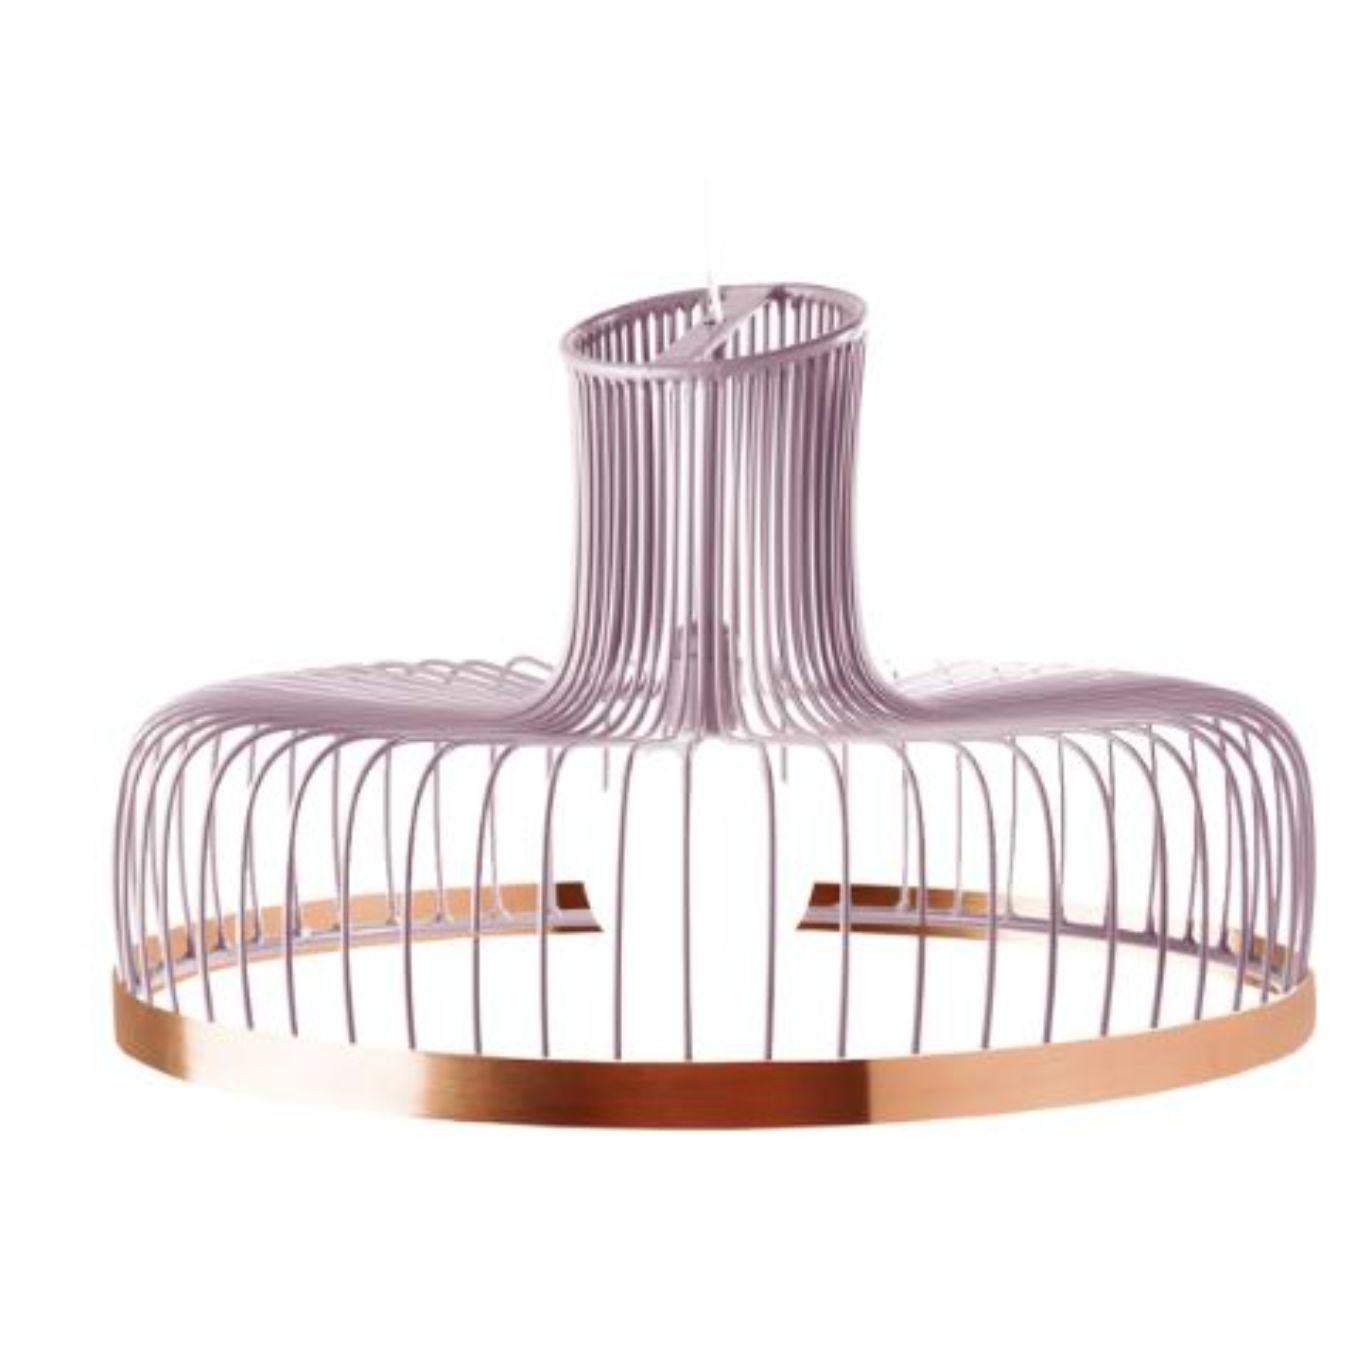 Lilac new spider suspension lamp with copper ring by Dooq
Dimensions: W 70 x D 70 x H 35 cm
Materials: lacquered metal, polished or brushed metal, copper.
Also available in different colors and materials. 

Information:
230V/50Hz
E27/1x20W